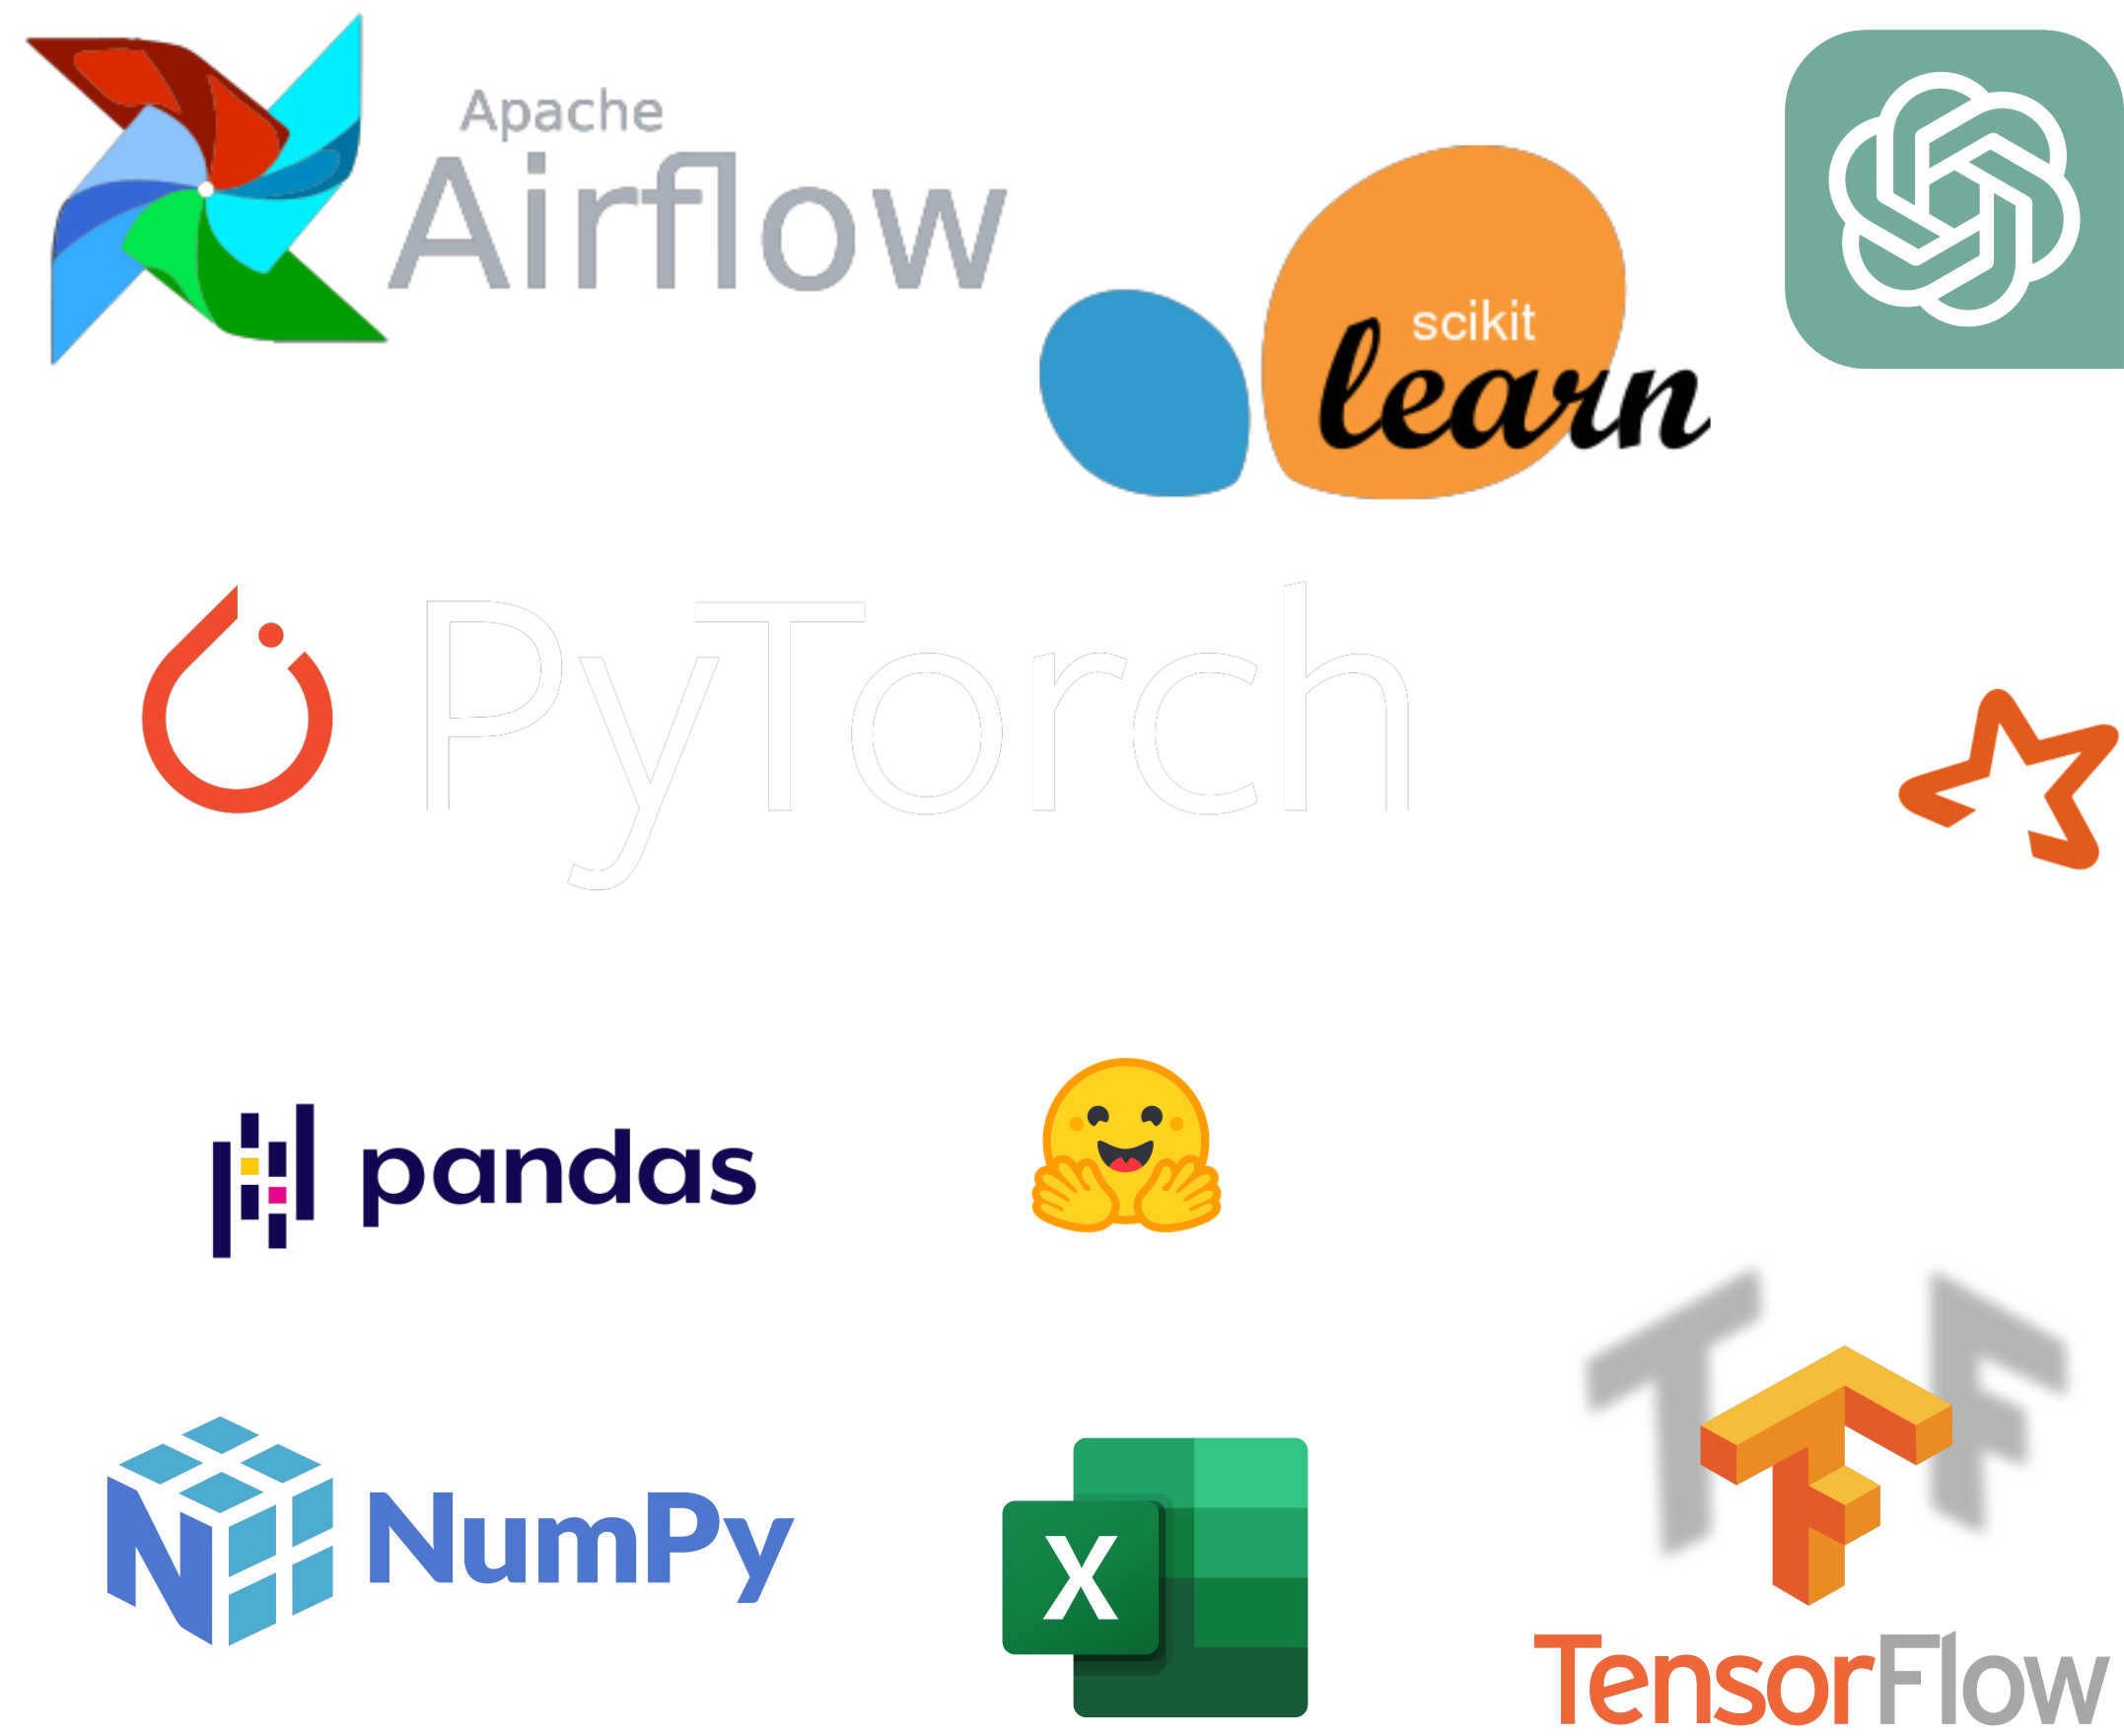 ML tools at Gradient: PyTorch, Tensorflow, GPT4, ChatGPT, HuggingFace, Scikit-Learn, NumPy, Seaborn, Excel, Xgboost, ...